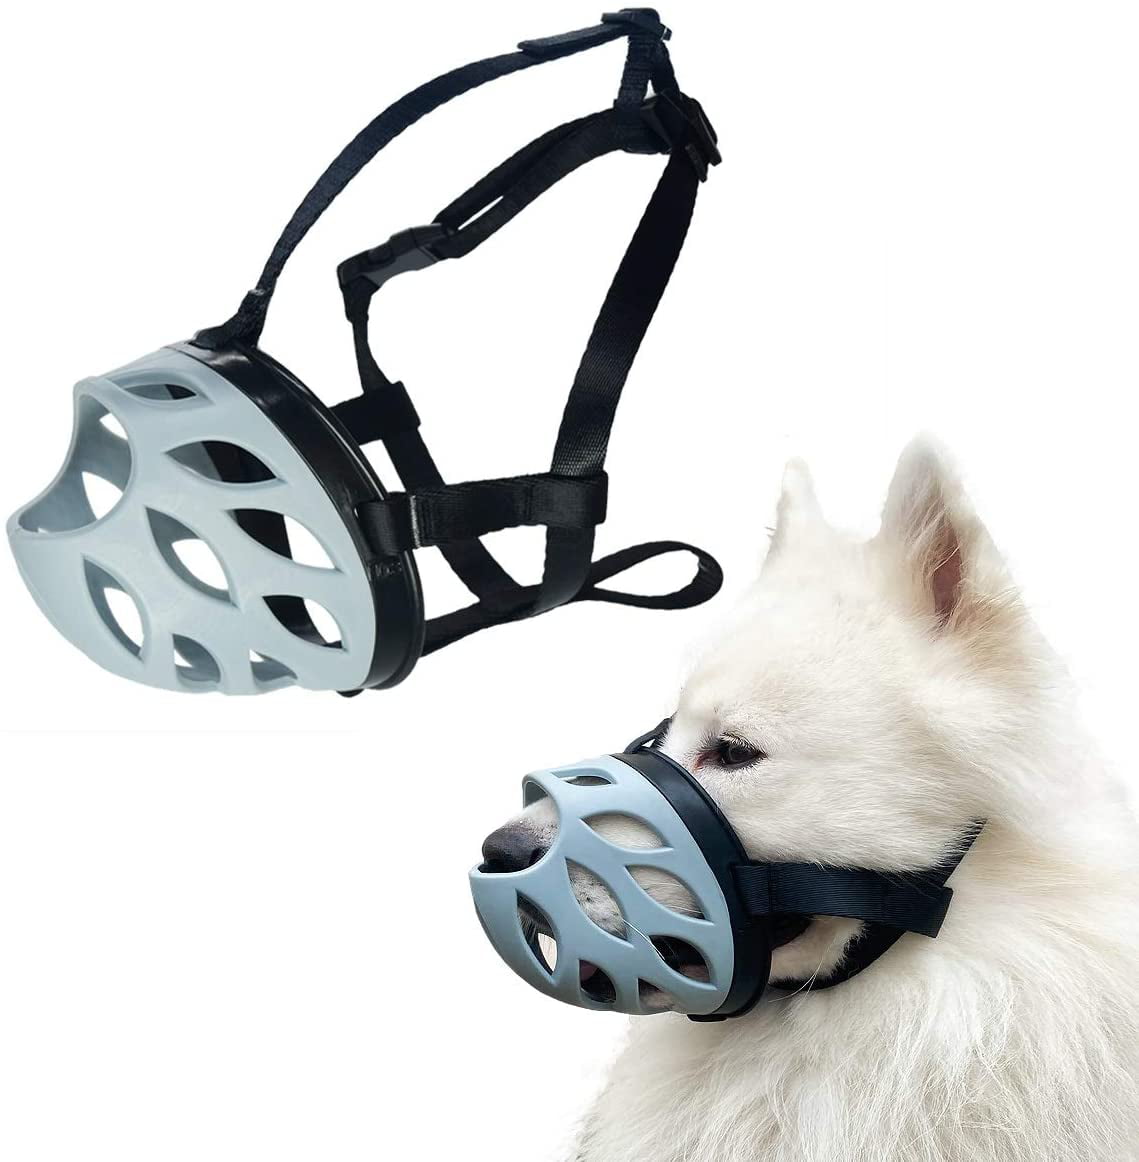 Allows Panting and Drinking Included Collar and Training Guide Dog Muzzle Prevents Unwanted Barking Biting and Chewing Soft Silicone Basket Muzzle for Dogs 